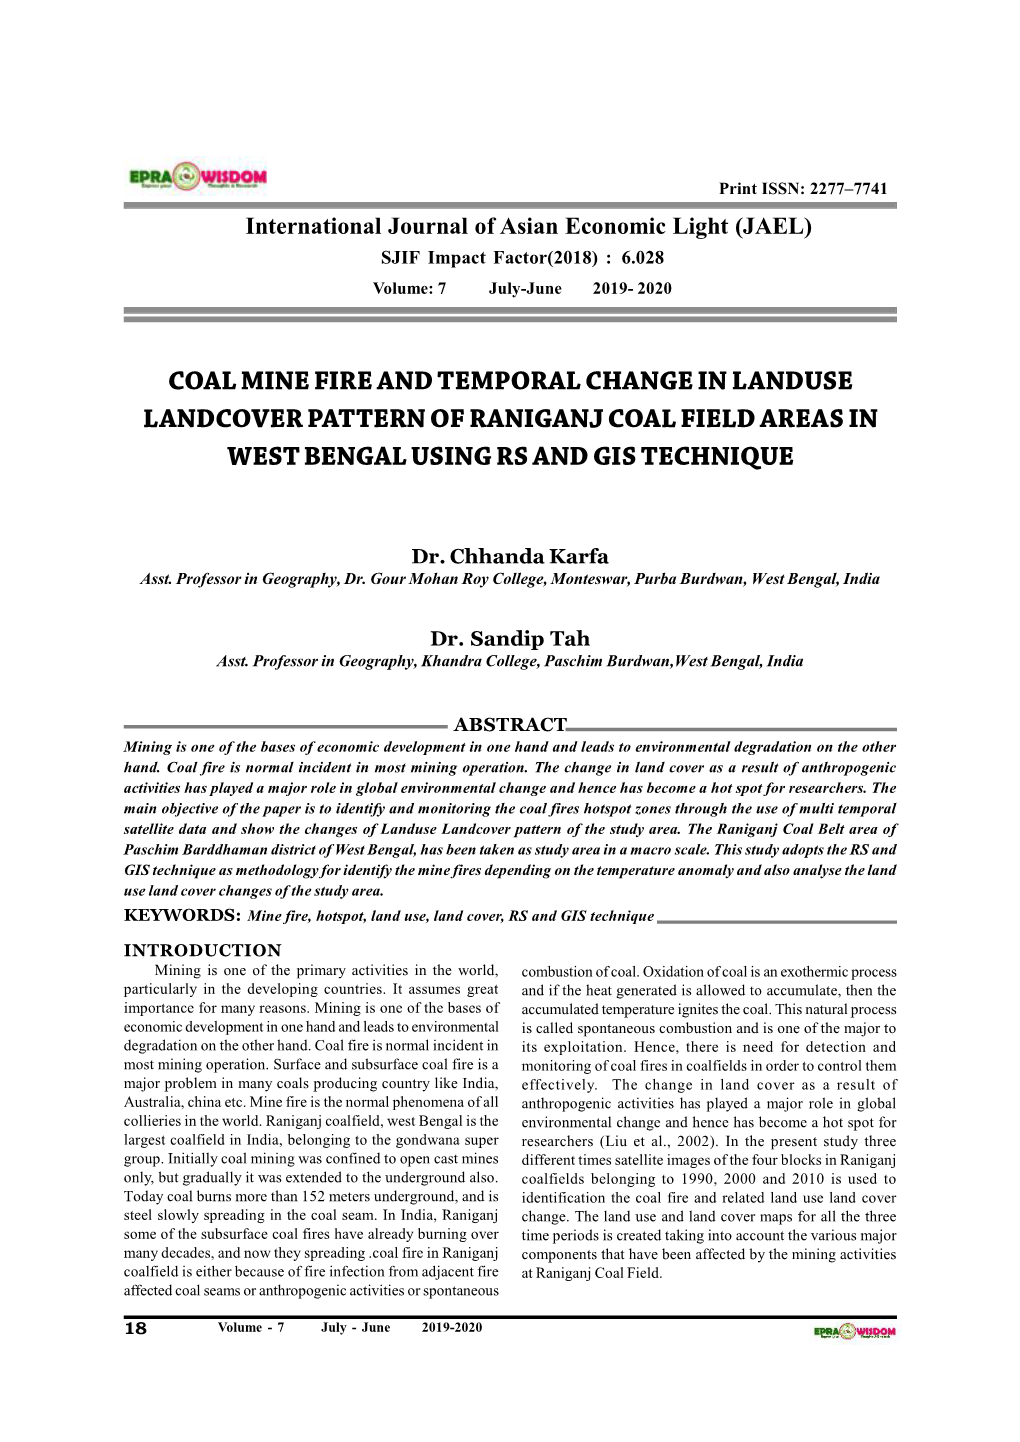 Coal Mine Fire and Temporal Change in Landuse Landcover Pattern of Raniganj Coal Field Areas in West Bengal Using Rs and Gis Technique